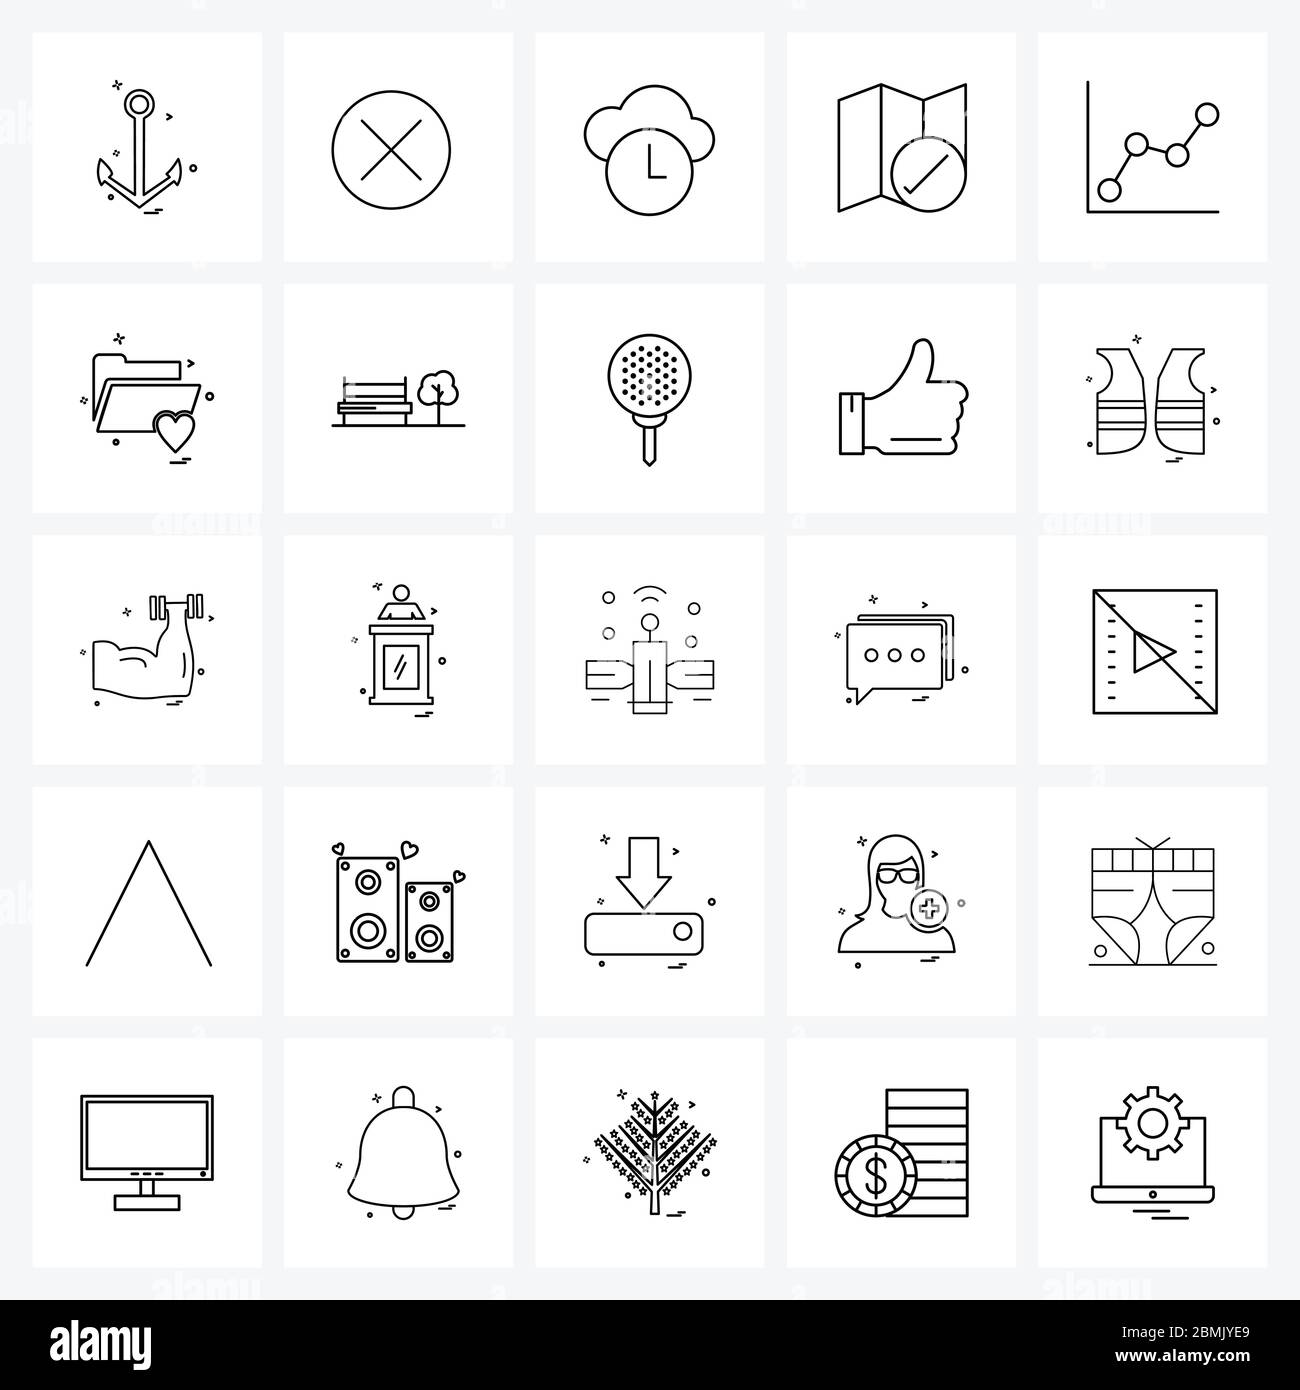 25 Editable Vector Line Icons and Modern Symbols of business, map ...